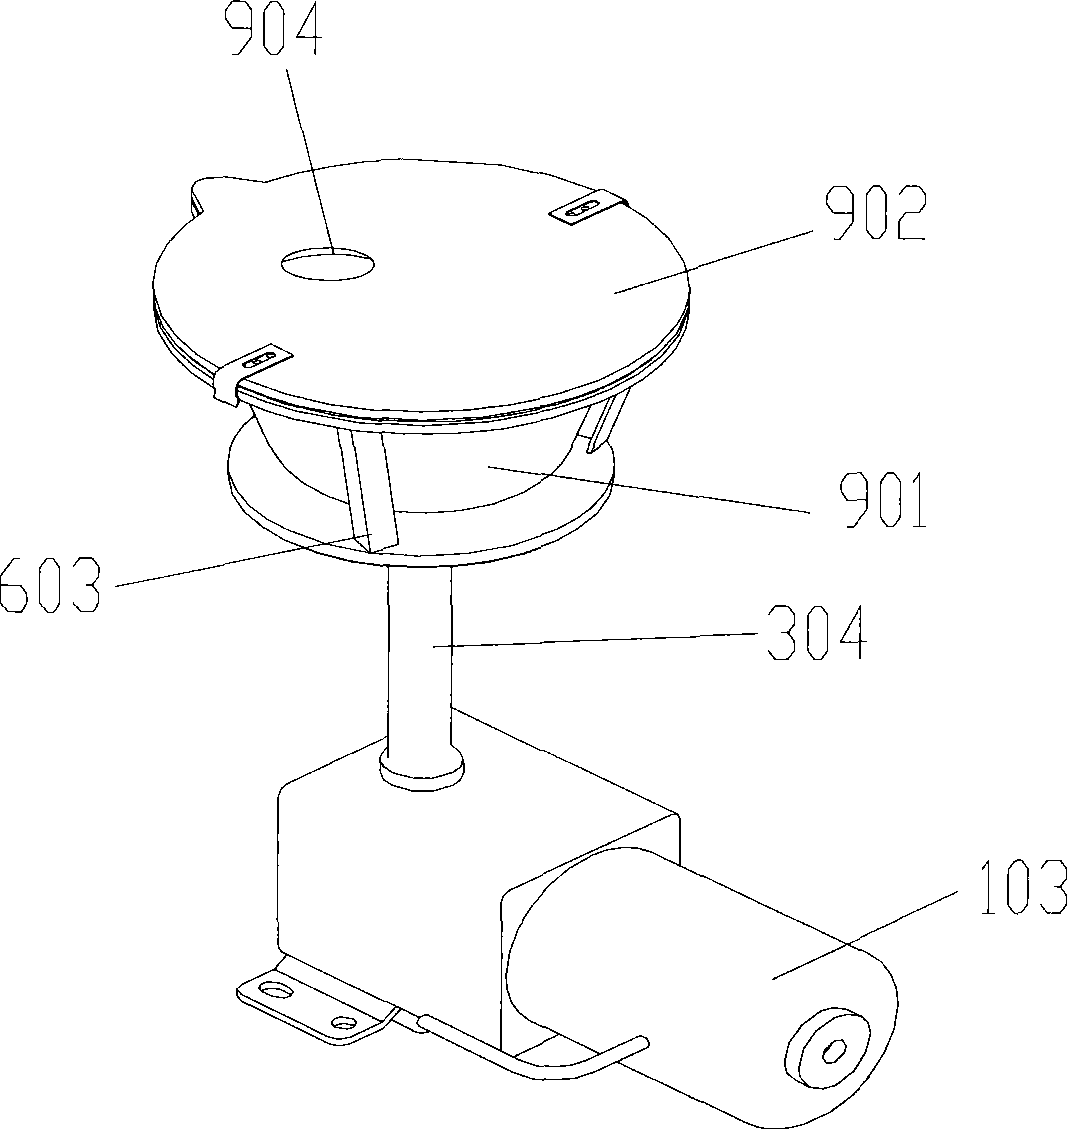 Device for automatically delivering fluid material and automatic/semiautomatic cooking device